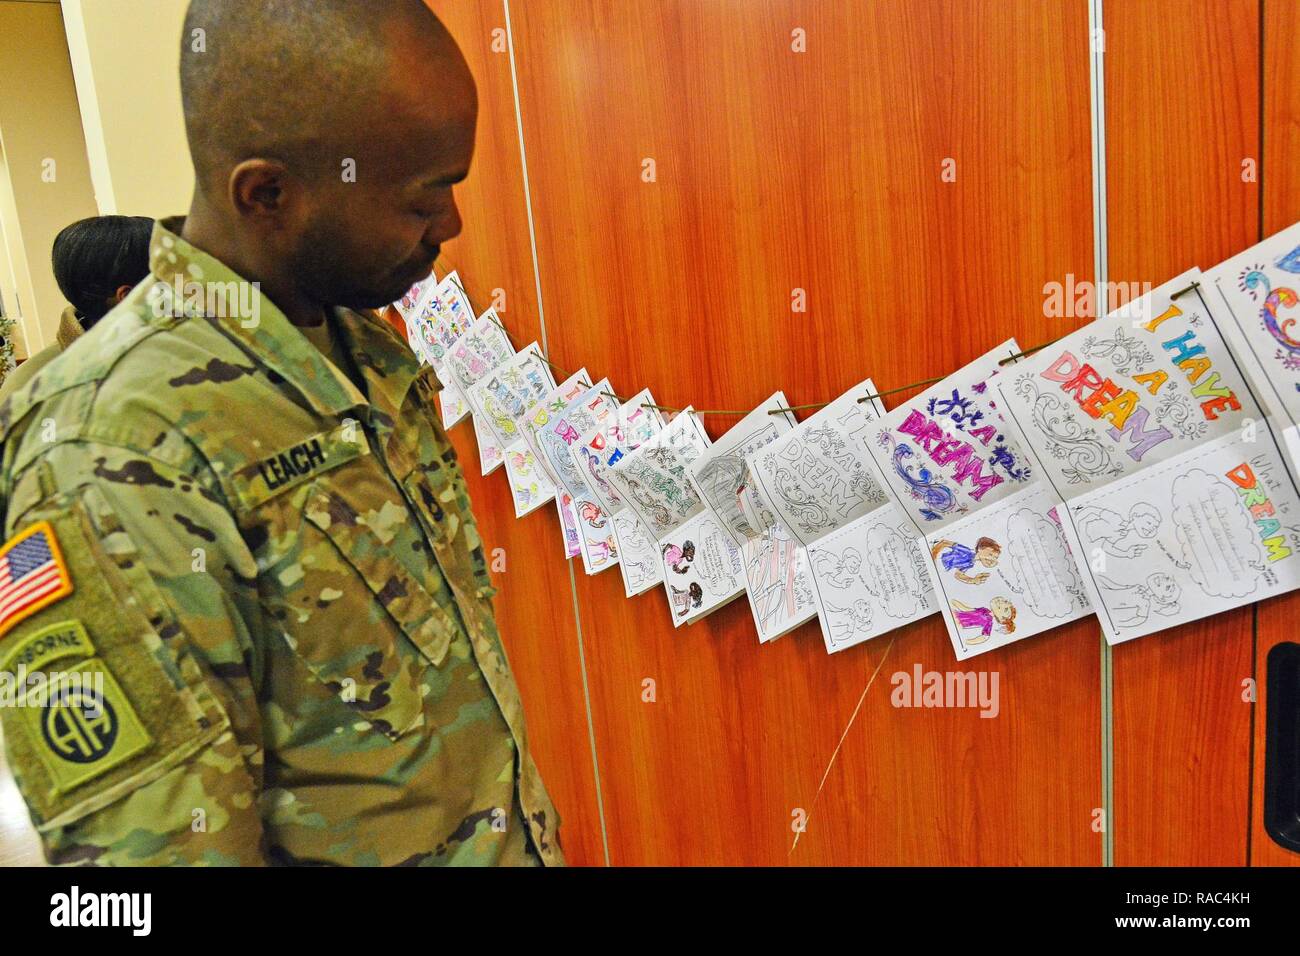 A Soldier from U.S. Army Africa observes children's drawings provided by the Vicenza Elementary School for Martin Luther King, Jr. Day during Vicenza Military Community’s 2017 Observance Ceremony at Caserma Ederle, Vicenza, Italy, Jan. 10, 2017. Stock Photo